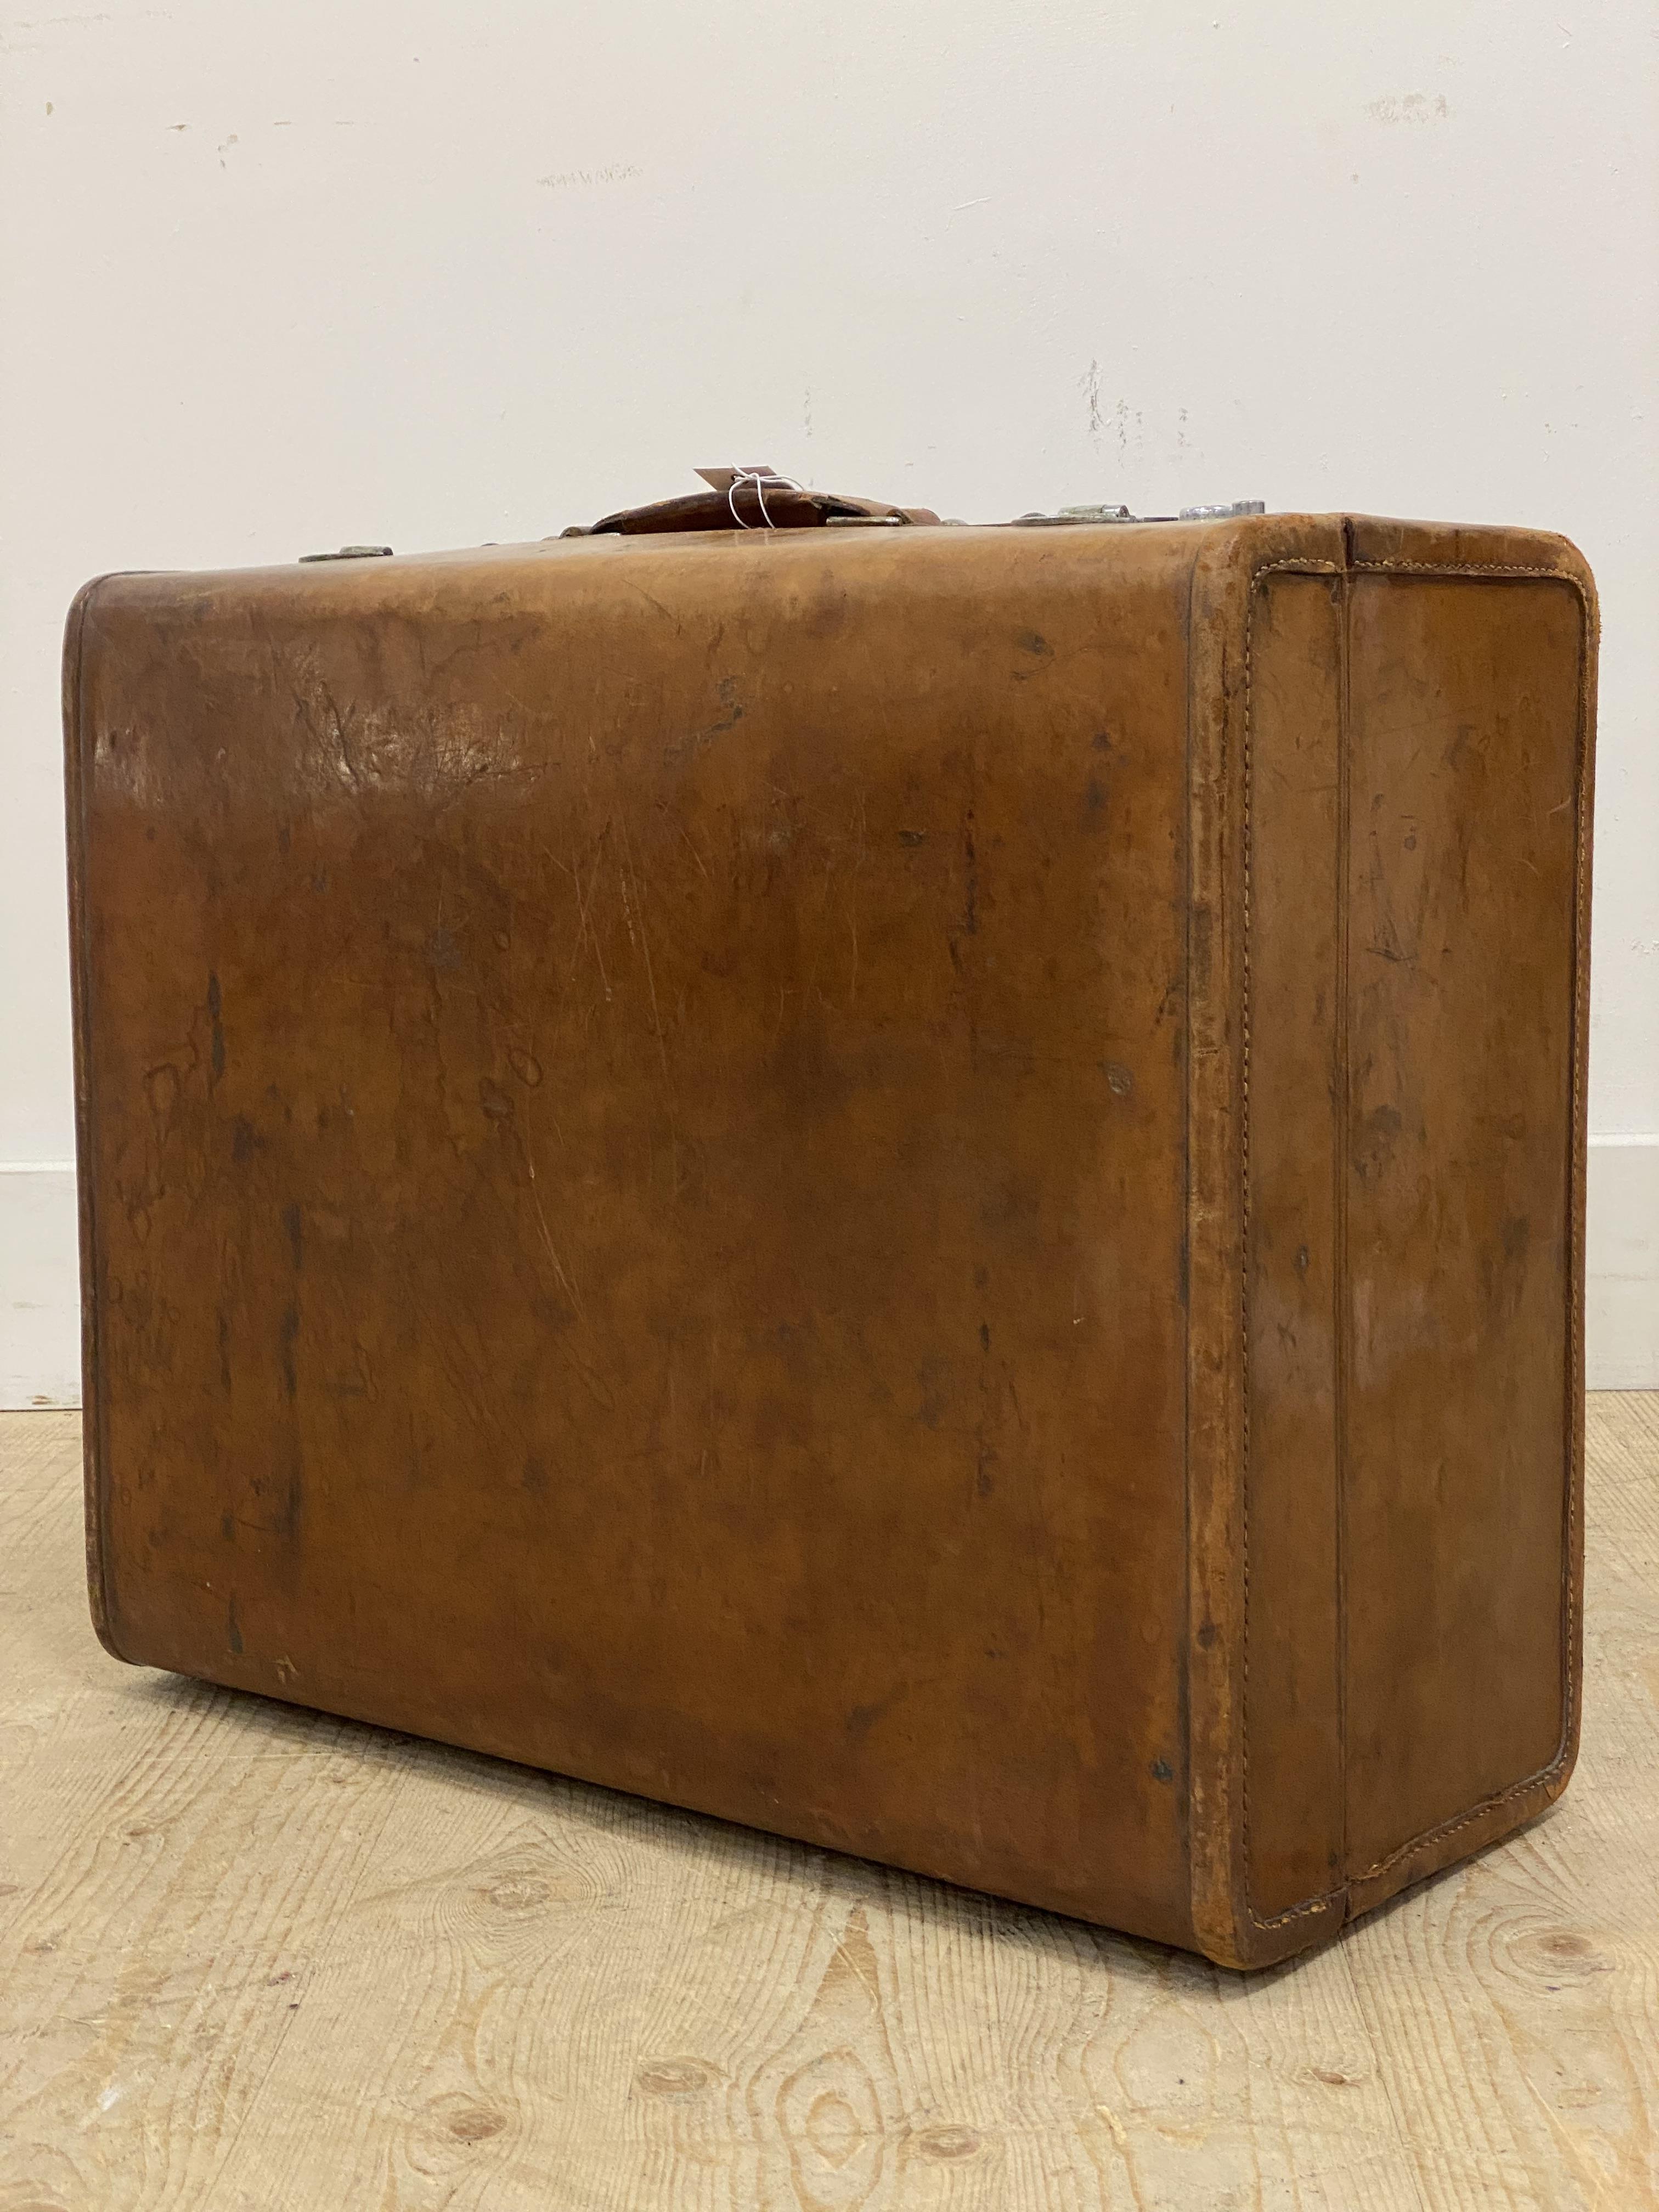 An early 20th century 'Rev-Robe' leather suitcase, with canvas lined and fitted interior, initialled